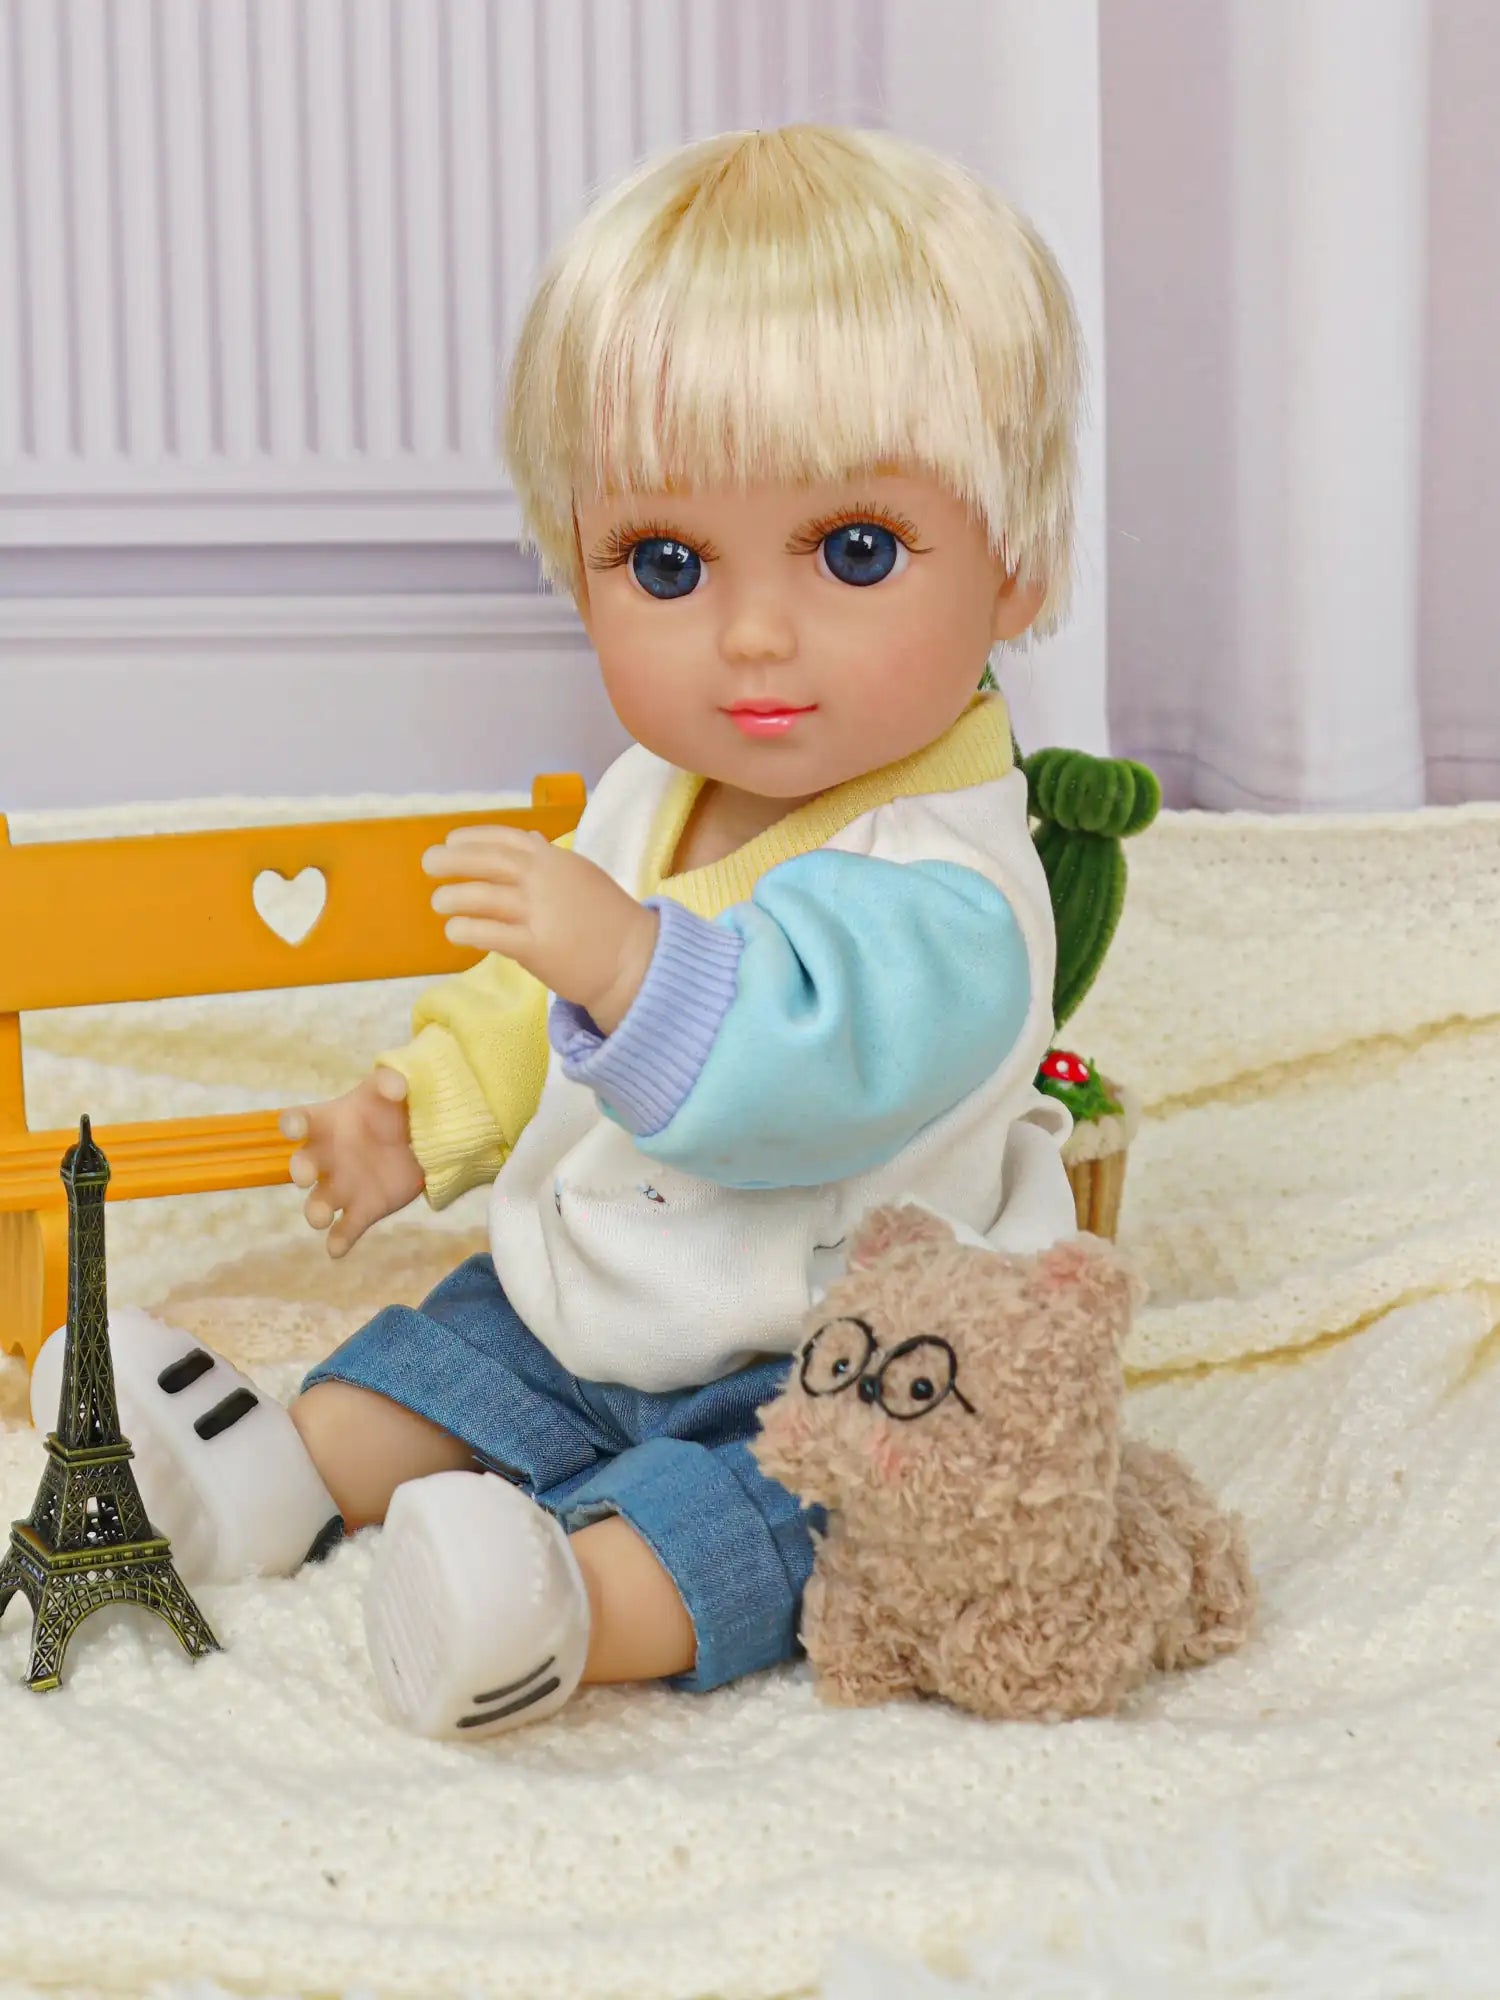 Charming blonde doll with a bob cut, dressed in a cozy sweater and shorts, with whimsical toys.